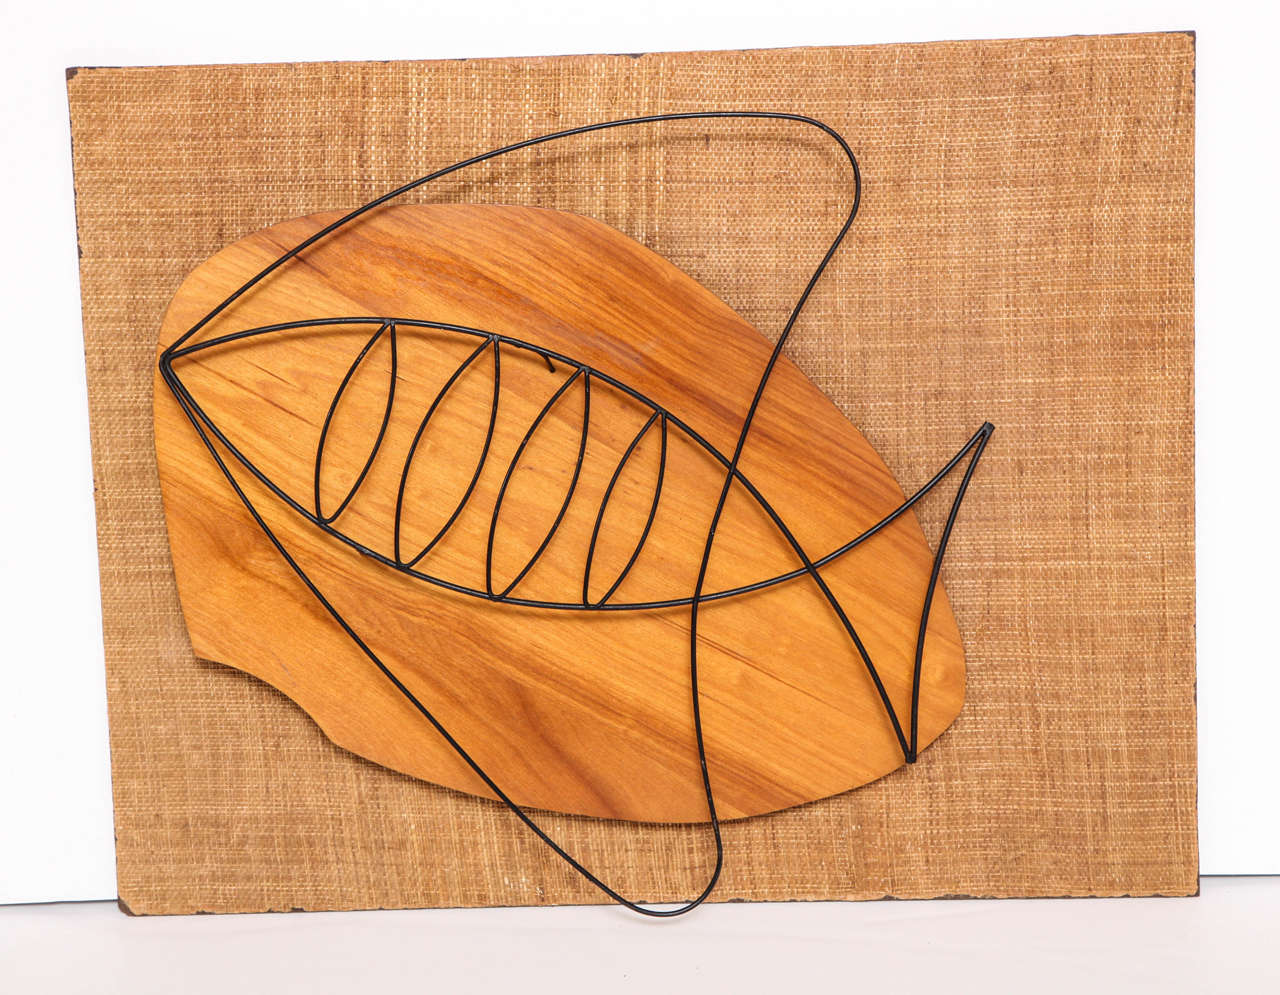 Decorative wall sculpture from circa 1950.
Jute fabric backing with a wood and metal sculpture of a fish.
The jute fabric has some worn off edges all around.